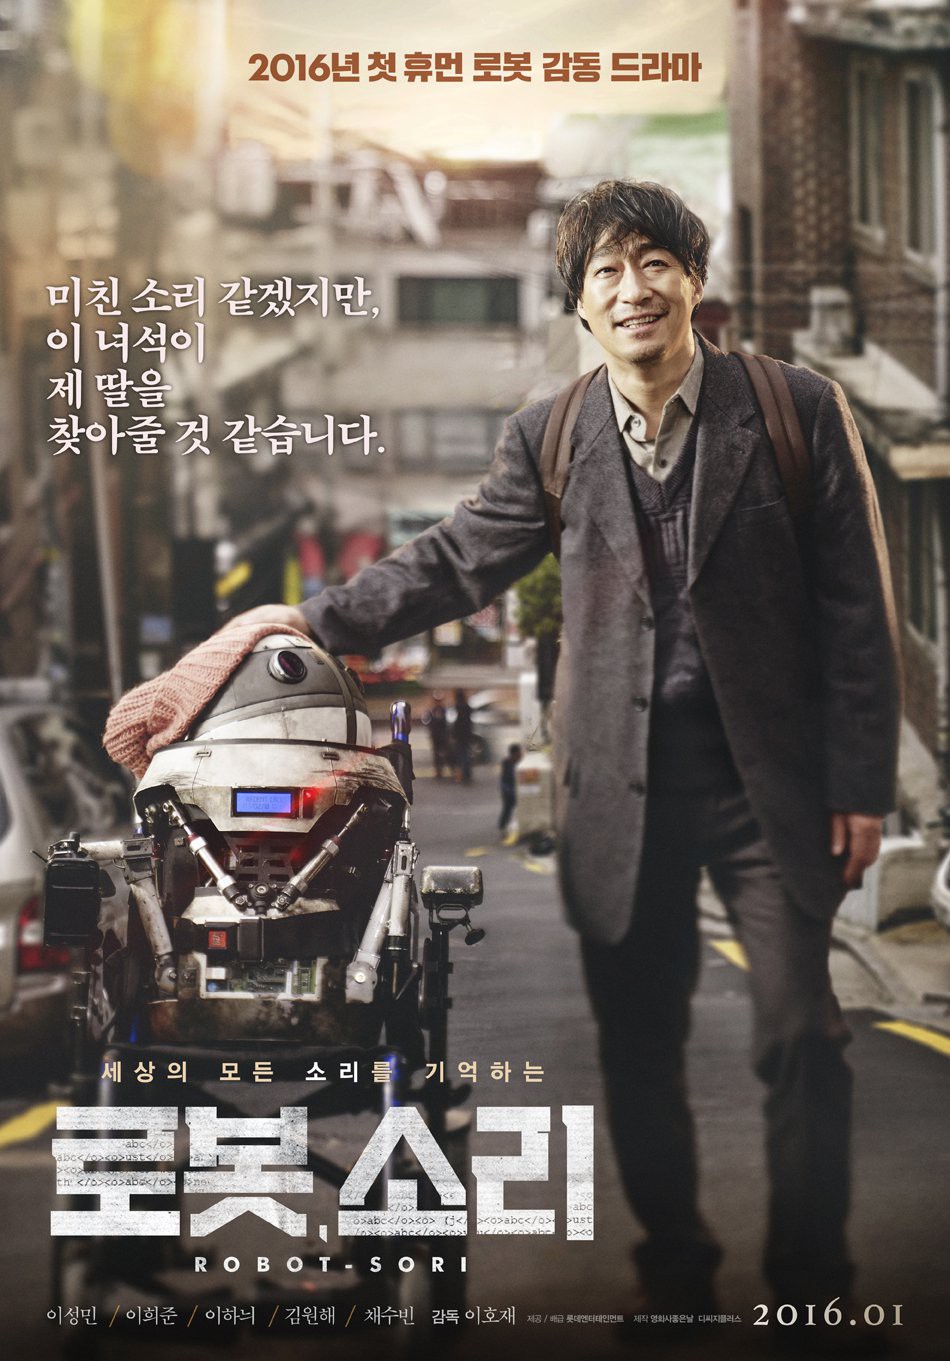 Extra Large Movie Poster Image for Robot, Sori 